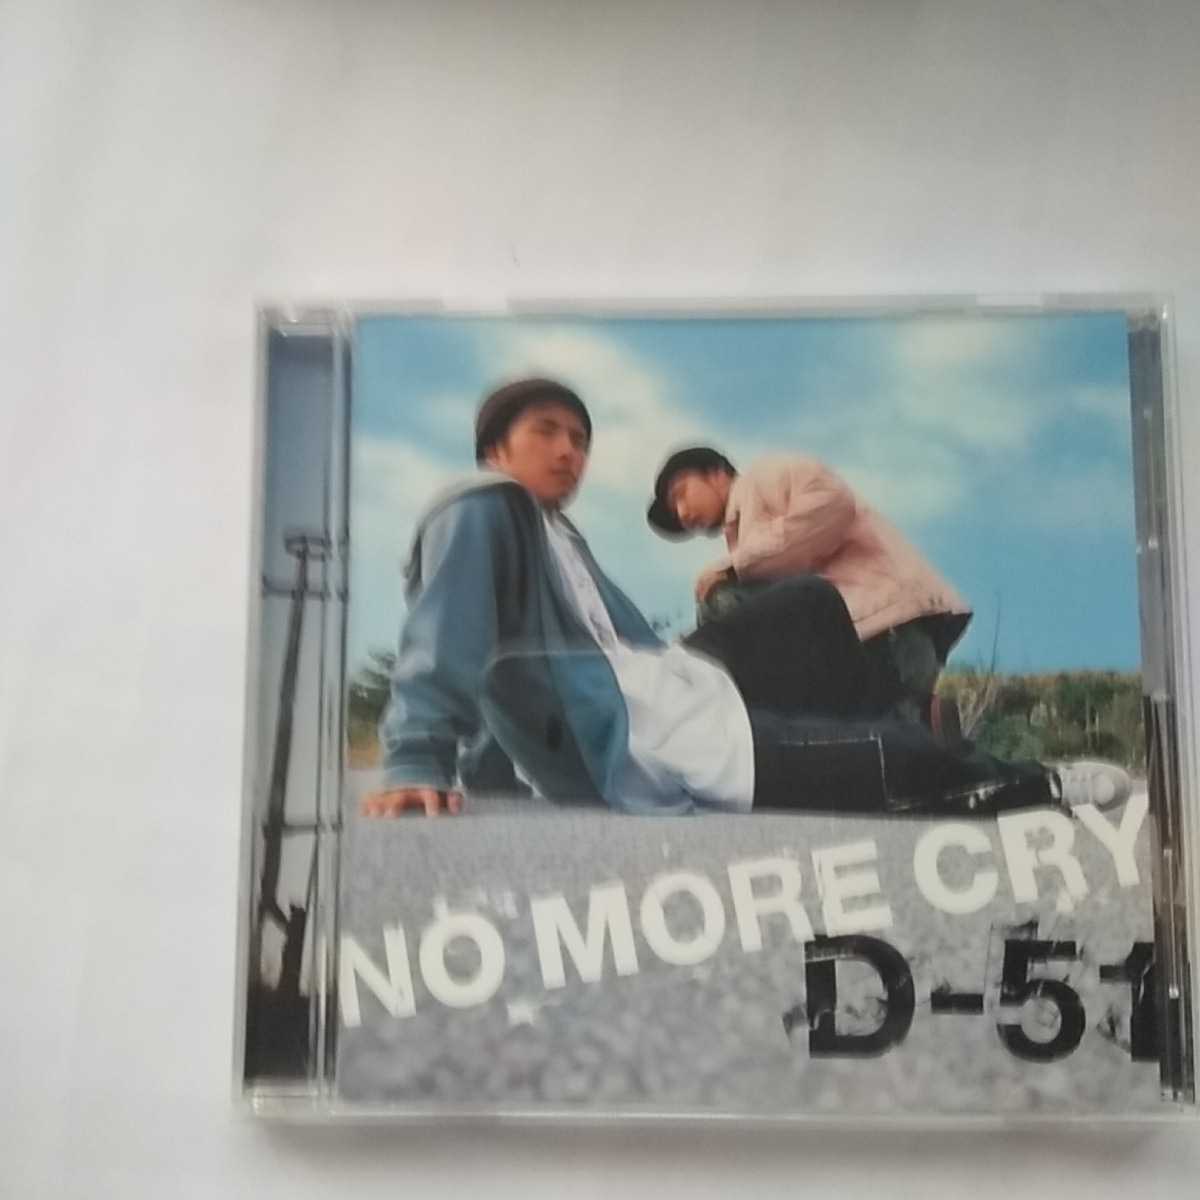 S085 CD　Ｄ－５１　１．NO MORE CRY　２．BELIEVER　３．NO MORE CRY（Back Track）　４．BELIEVER（Back Track）_画像3